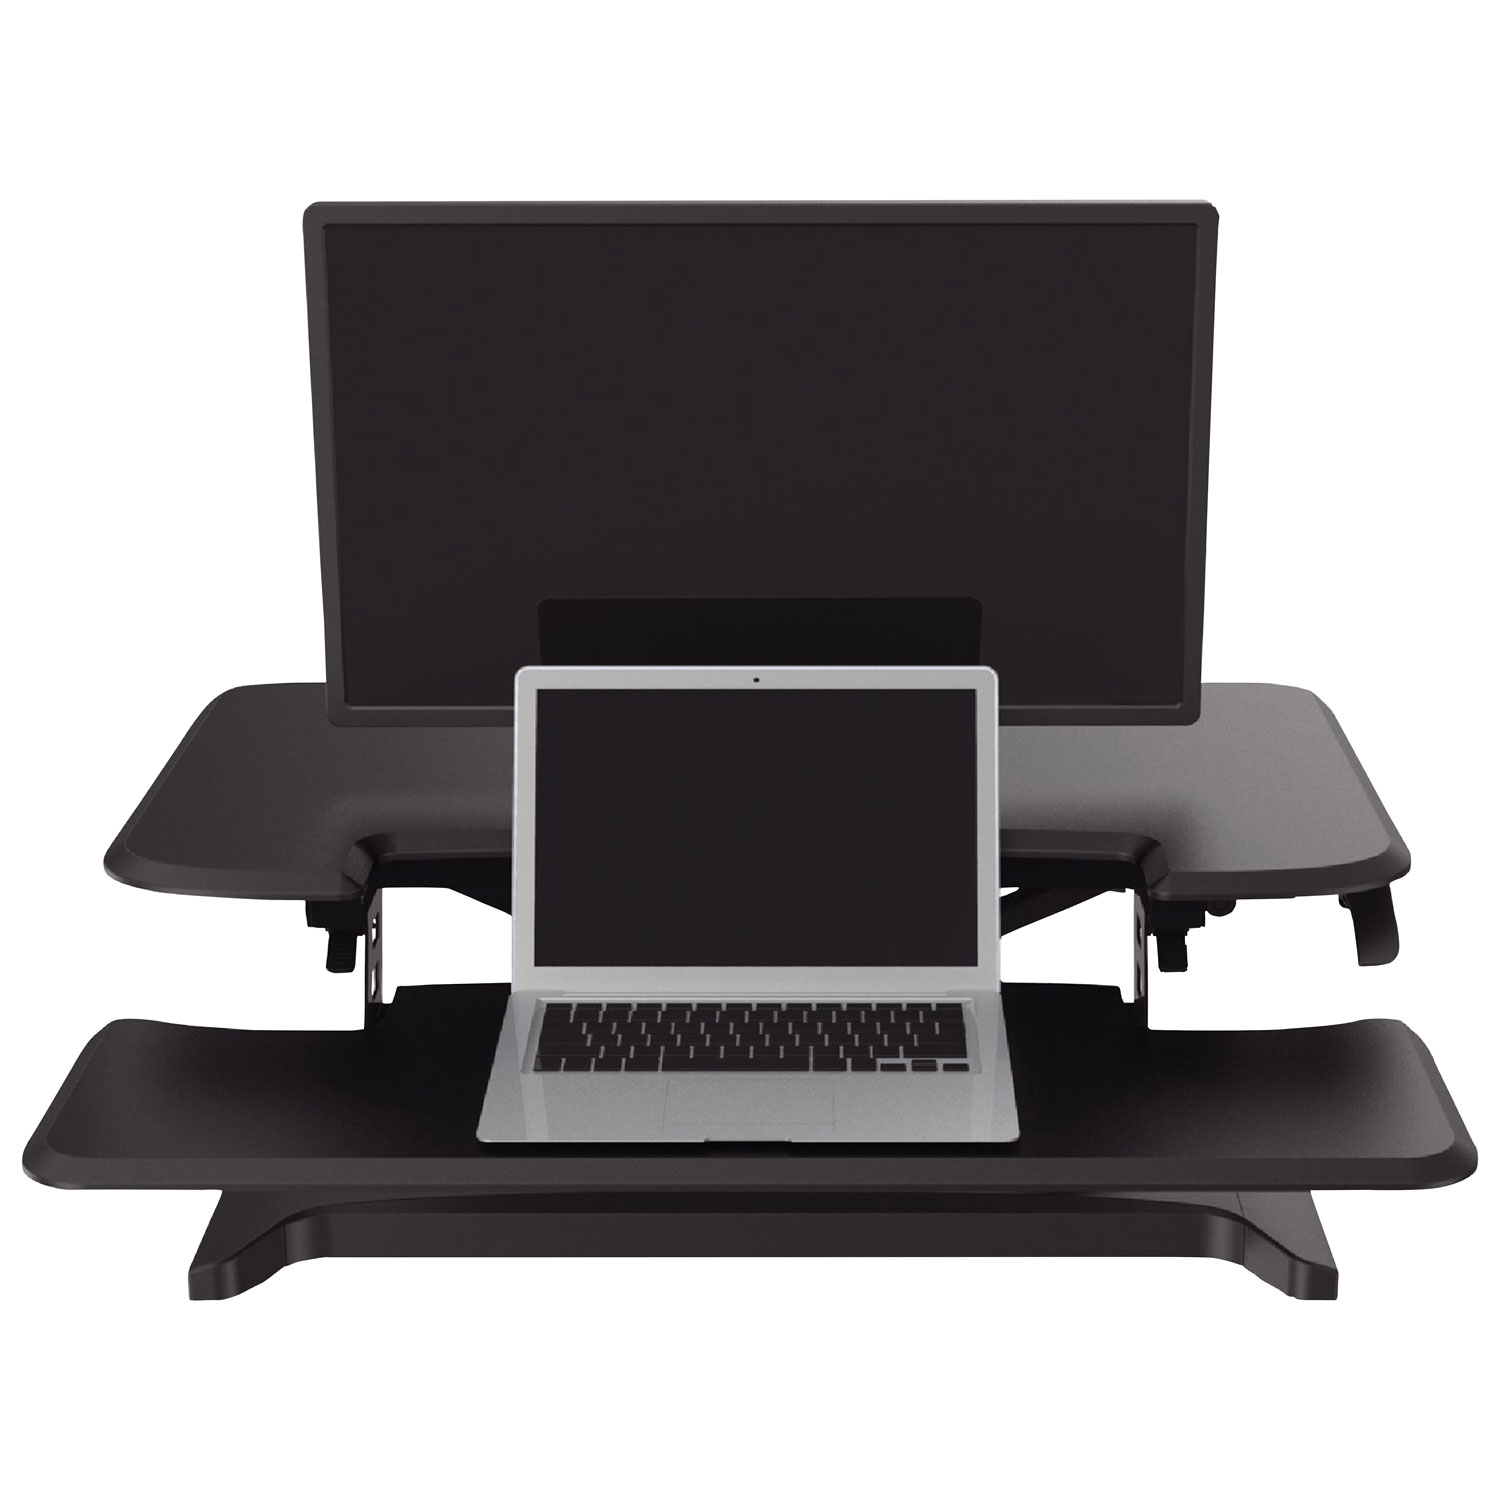 TygerClaw Standing Desk Riser with Keyboard Tray - Black